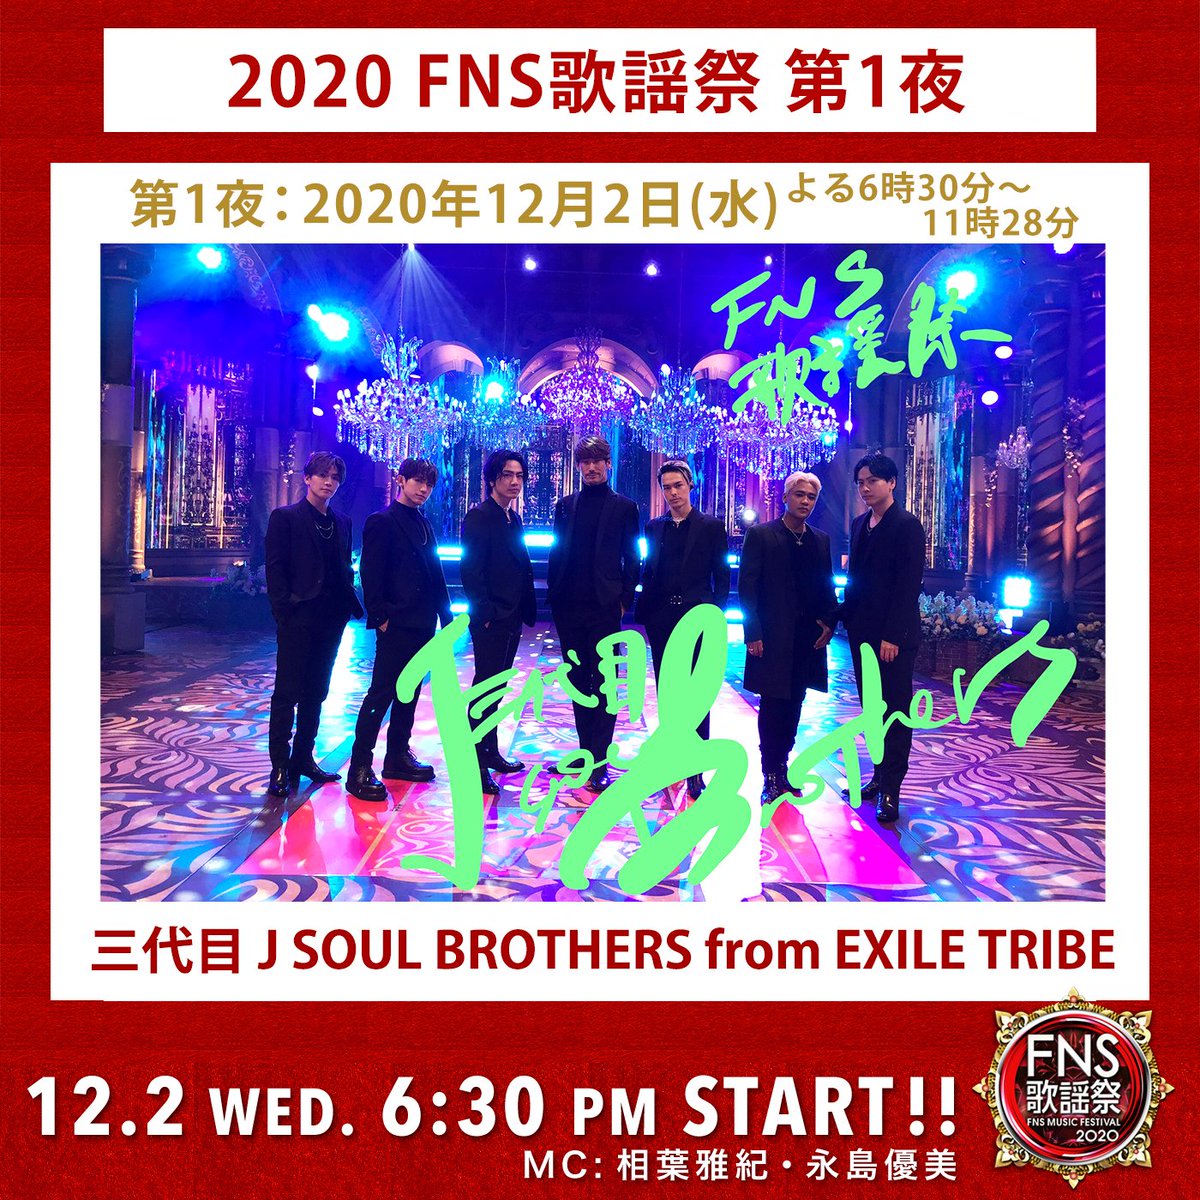 Fns歌謡祭 公式 フジテレビ系列で放送中 Fns歌謡祭 第１夜 三代目 J Soul Brothers From Exile Tribeの皆さん ありがとうございました いつ聞いても名曲です 最高のパフォーマンスありがとうございました 三代目jsb 10th 三代目jsb Jsb3